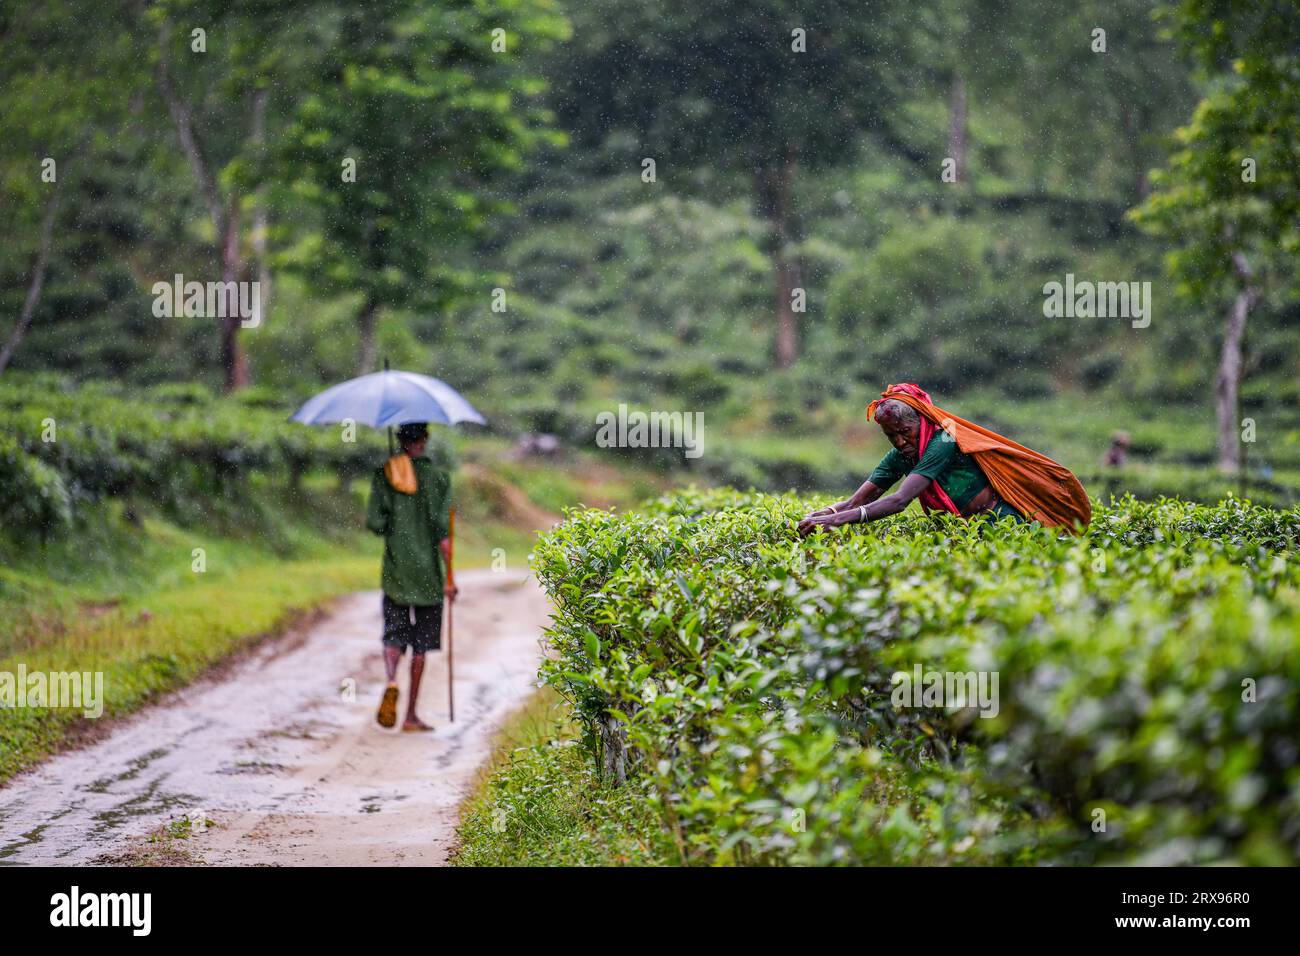 A Bangladeshi woman plucking tea leaves at a tea garden in Sylhet. Tea Plucking is a specialized skill. Two leaves and a bud need to be plucked in order to get the best taste and profitability. The calculation of daily wage is 170tk(1.60$) for plucking at least 22-23 kg leaves per day for a worker. The area of Sylhet has over 150 gardens including three of the largest tea gardens in the world both in area and production. Nearly 300,000 workers are employed on the tea estates of which over 75% are women but they are passing their lives as a slave. Stock Photo